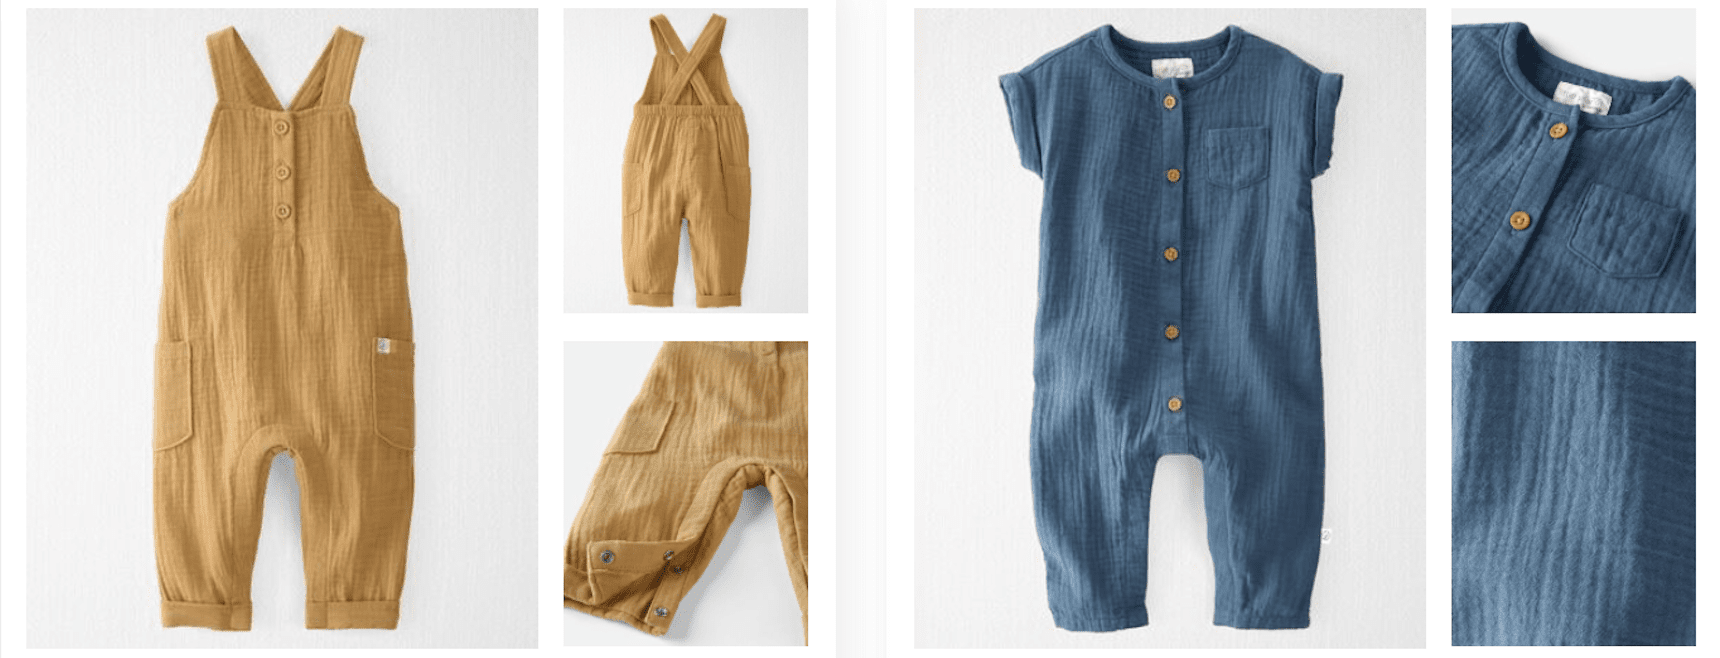 Carter's baby and toddler clothing